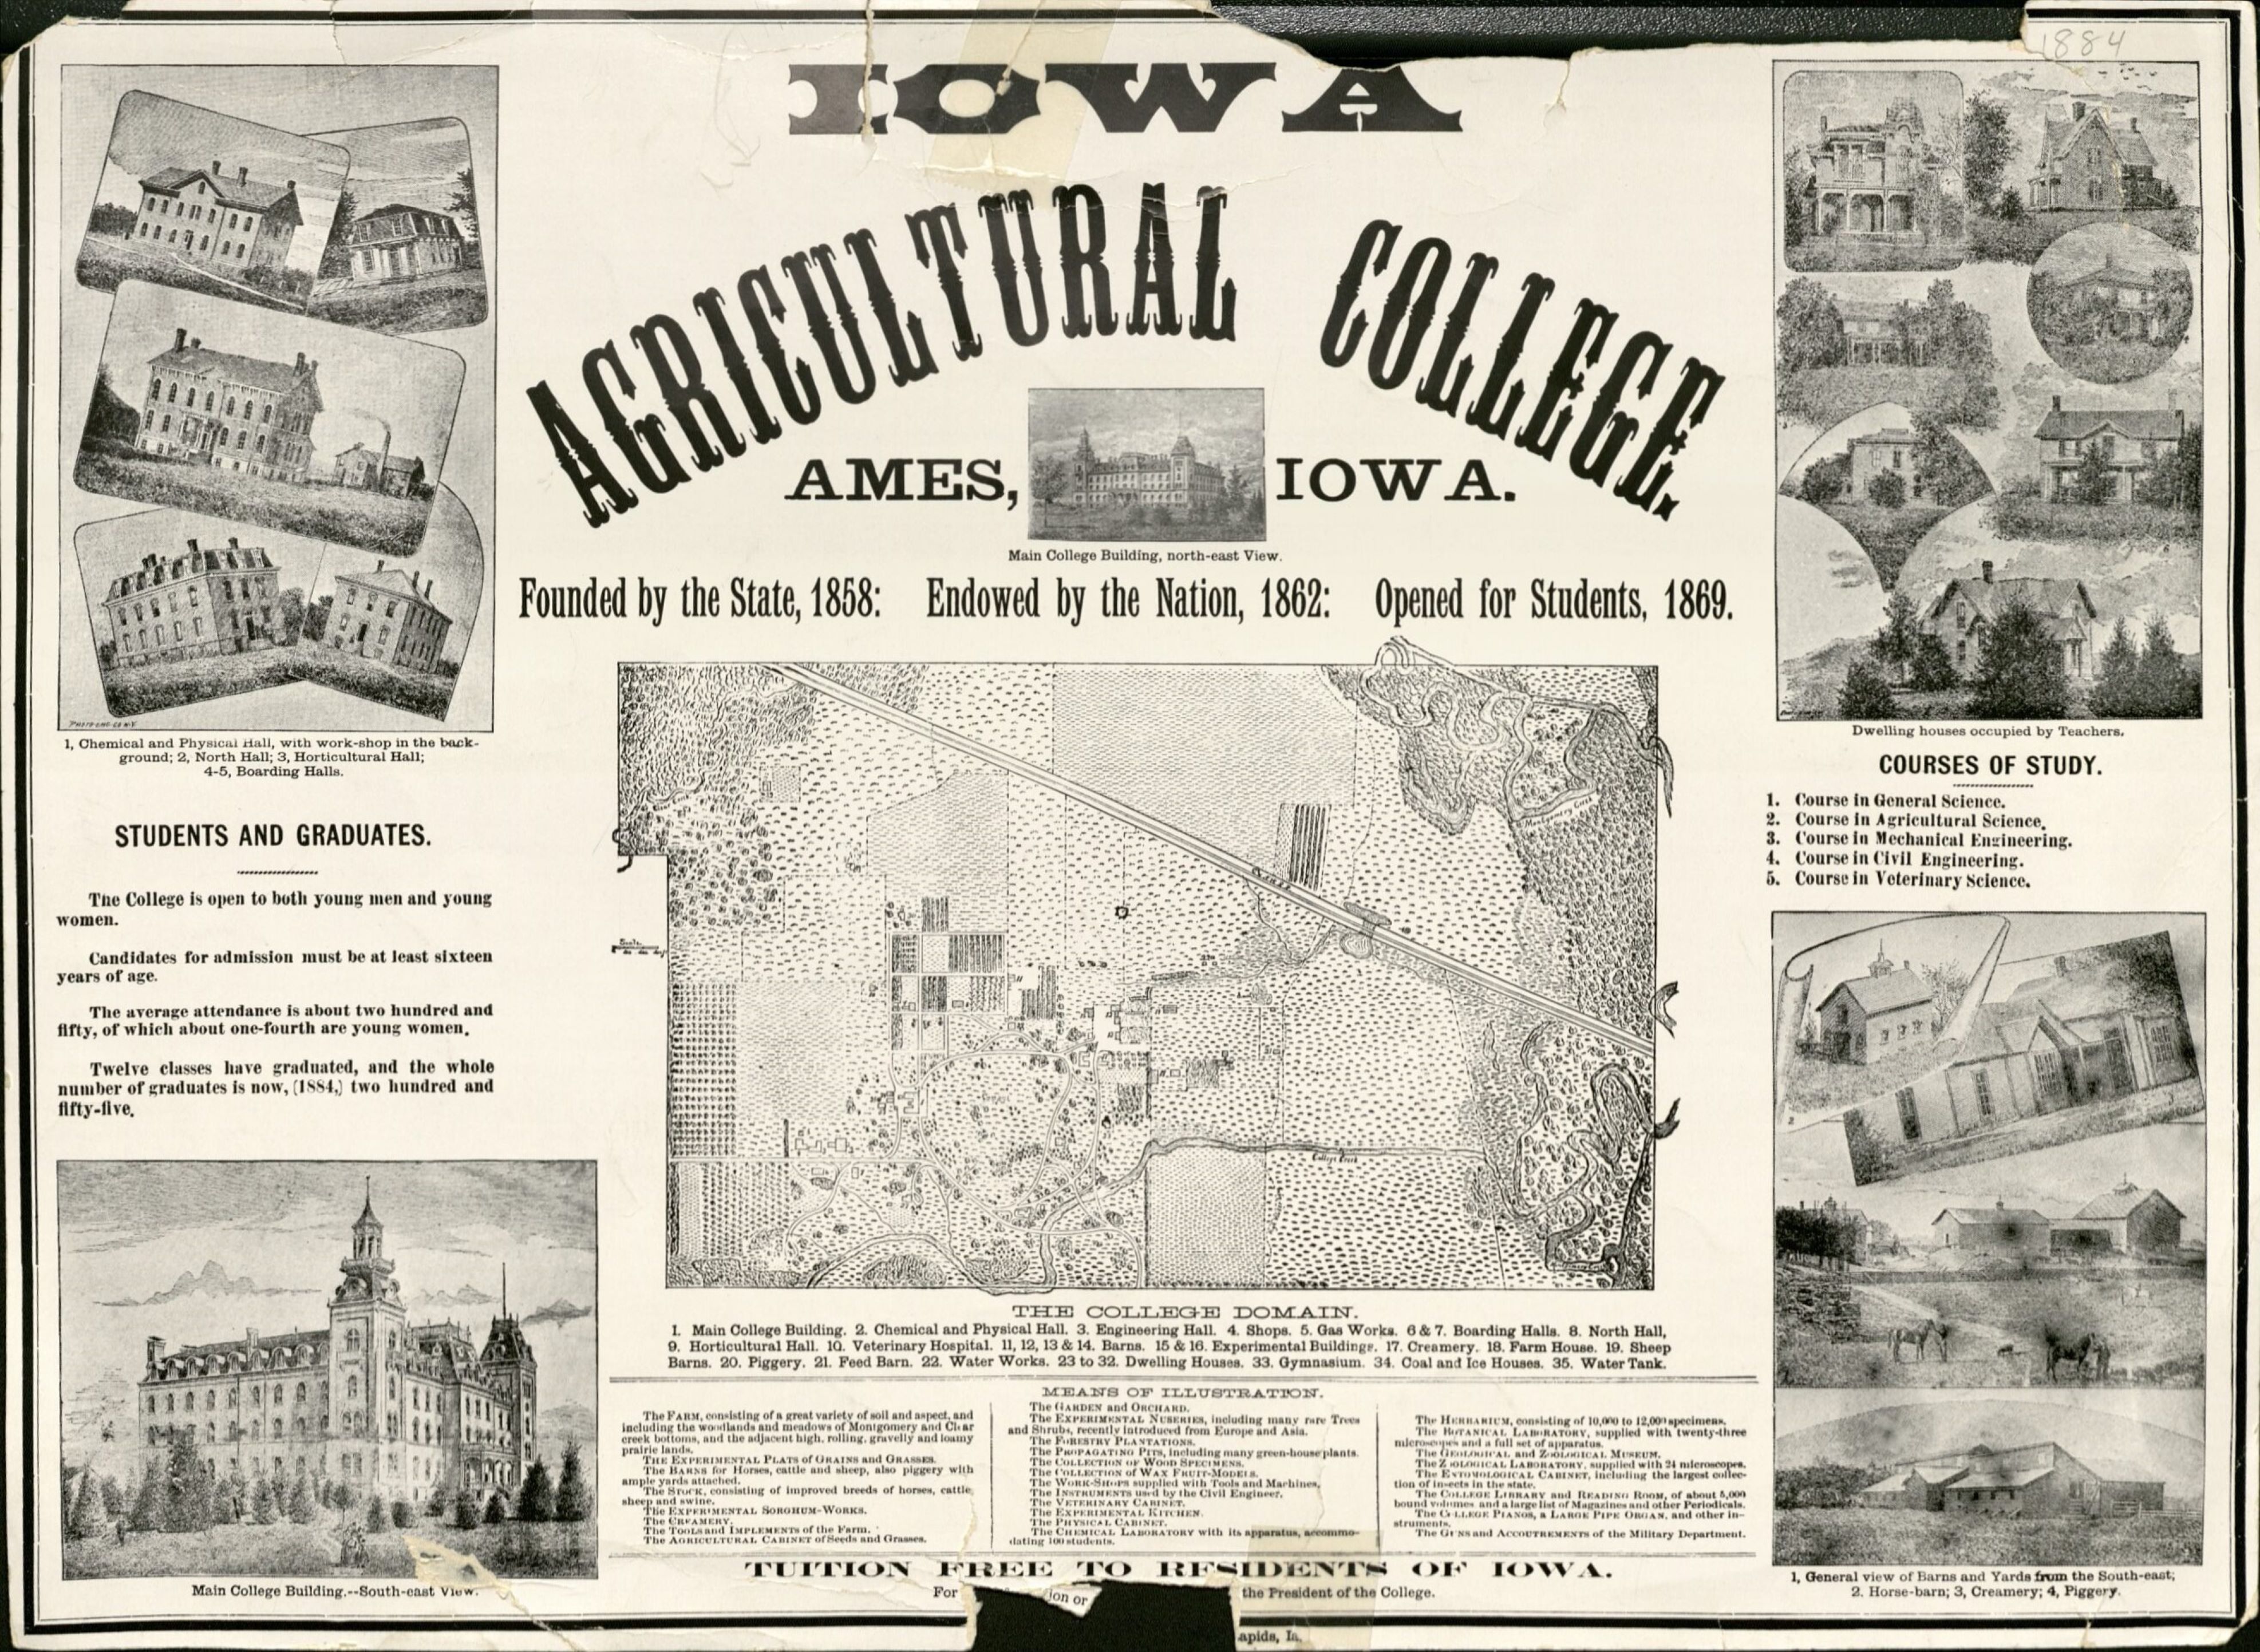 Announcement for the Iowa Agricultural College, circa 1884